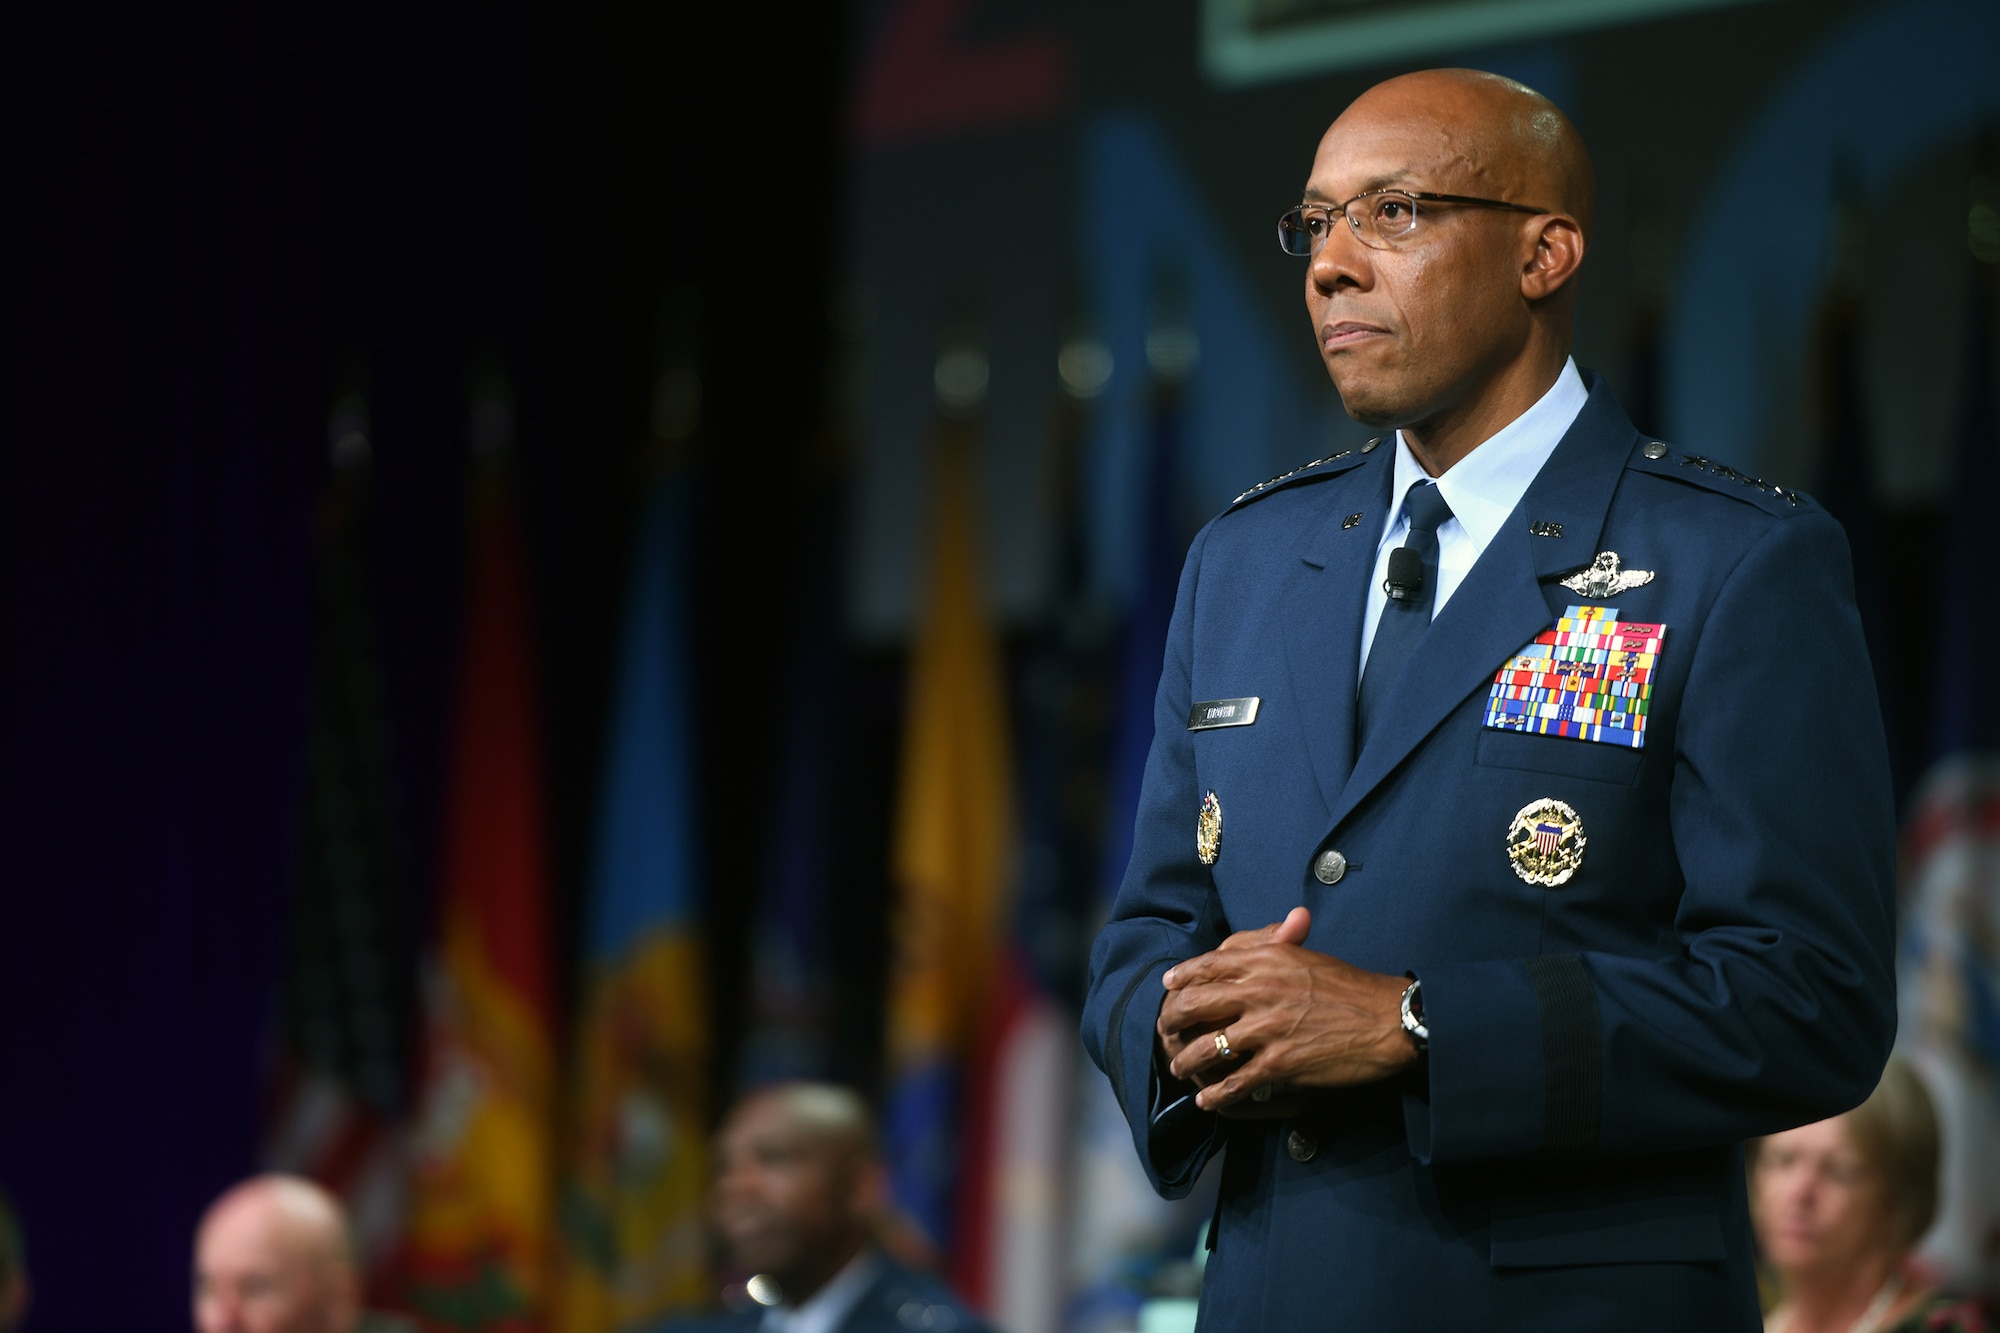 “The National Guard is critical to our nation’s defense," Air Force Gen. Charles Q. Brown Jr., chief of staff of the Air Force, told National Guard leaders gathered in Columbus, Ohio, Aug. 27, 2022.